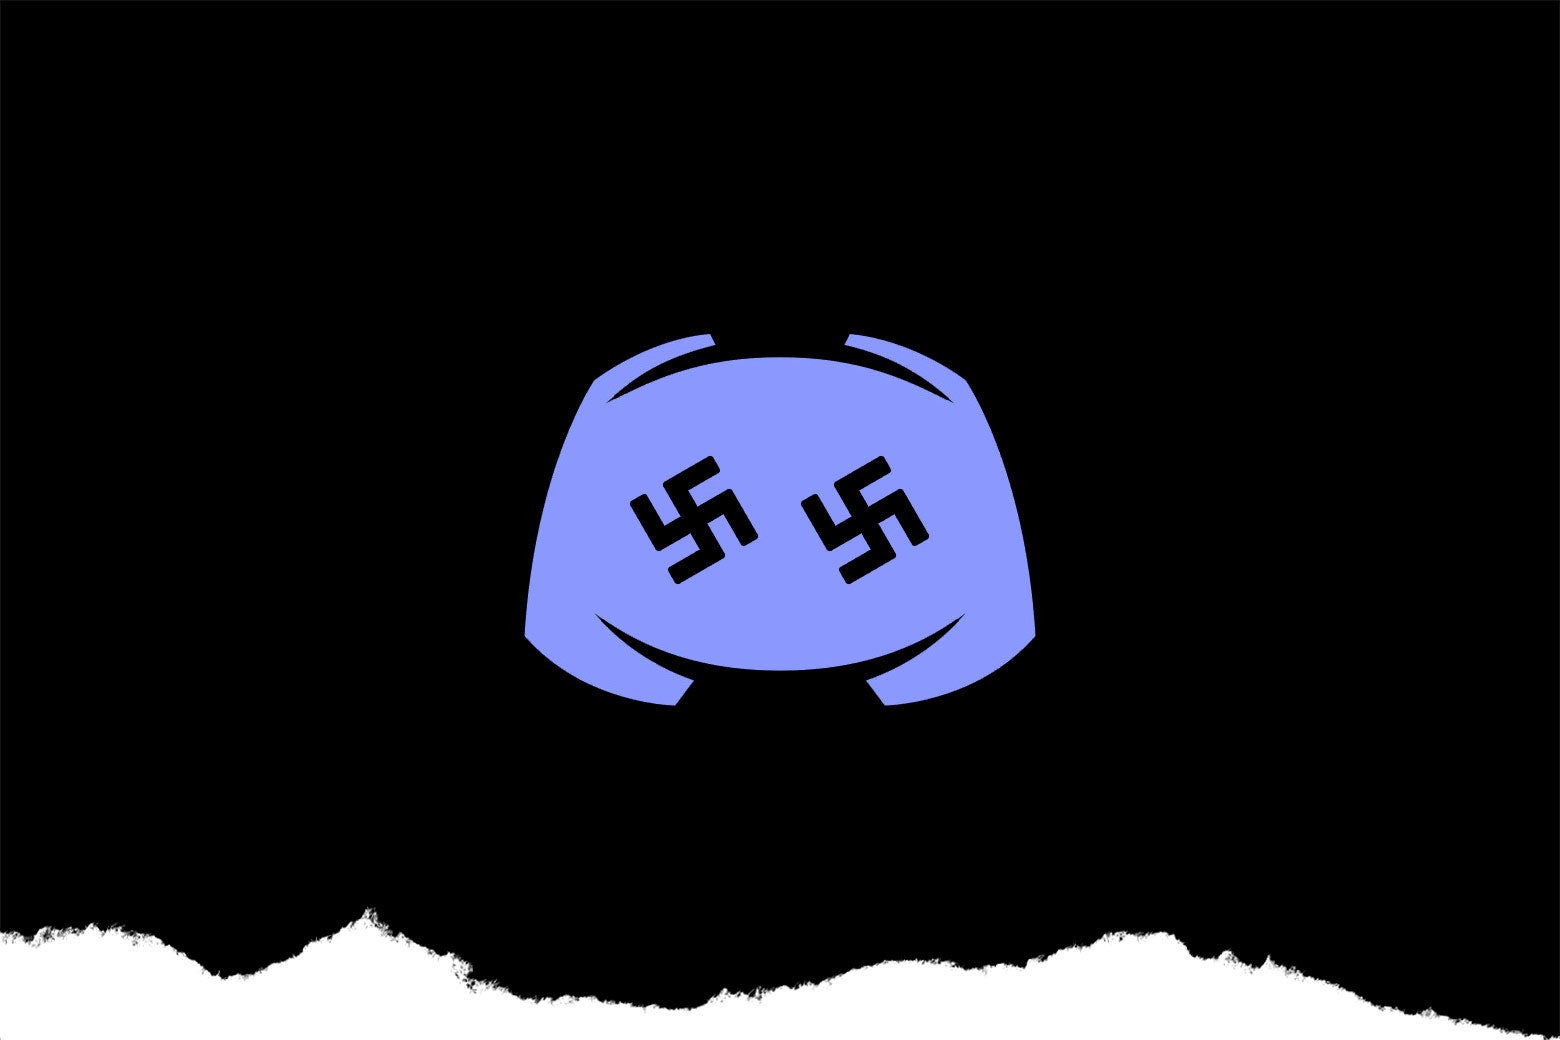 Discord logo with swastikas instead of eyes.